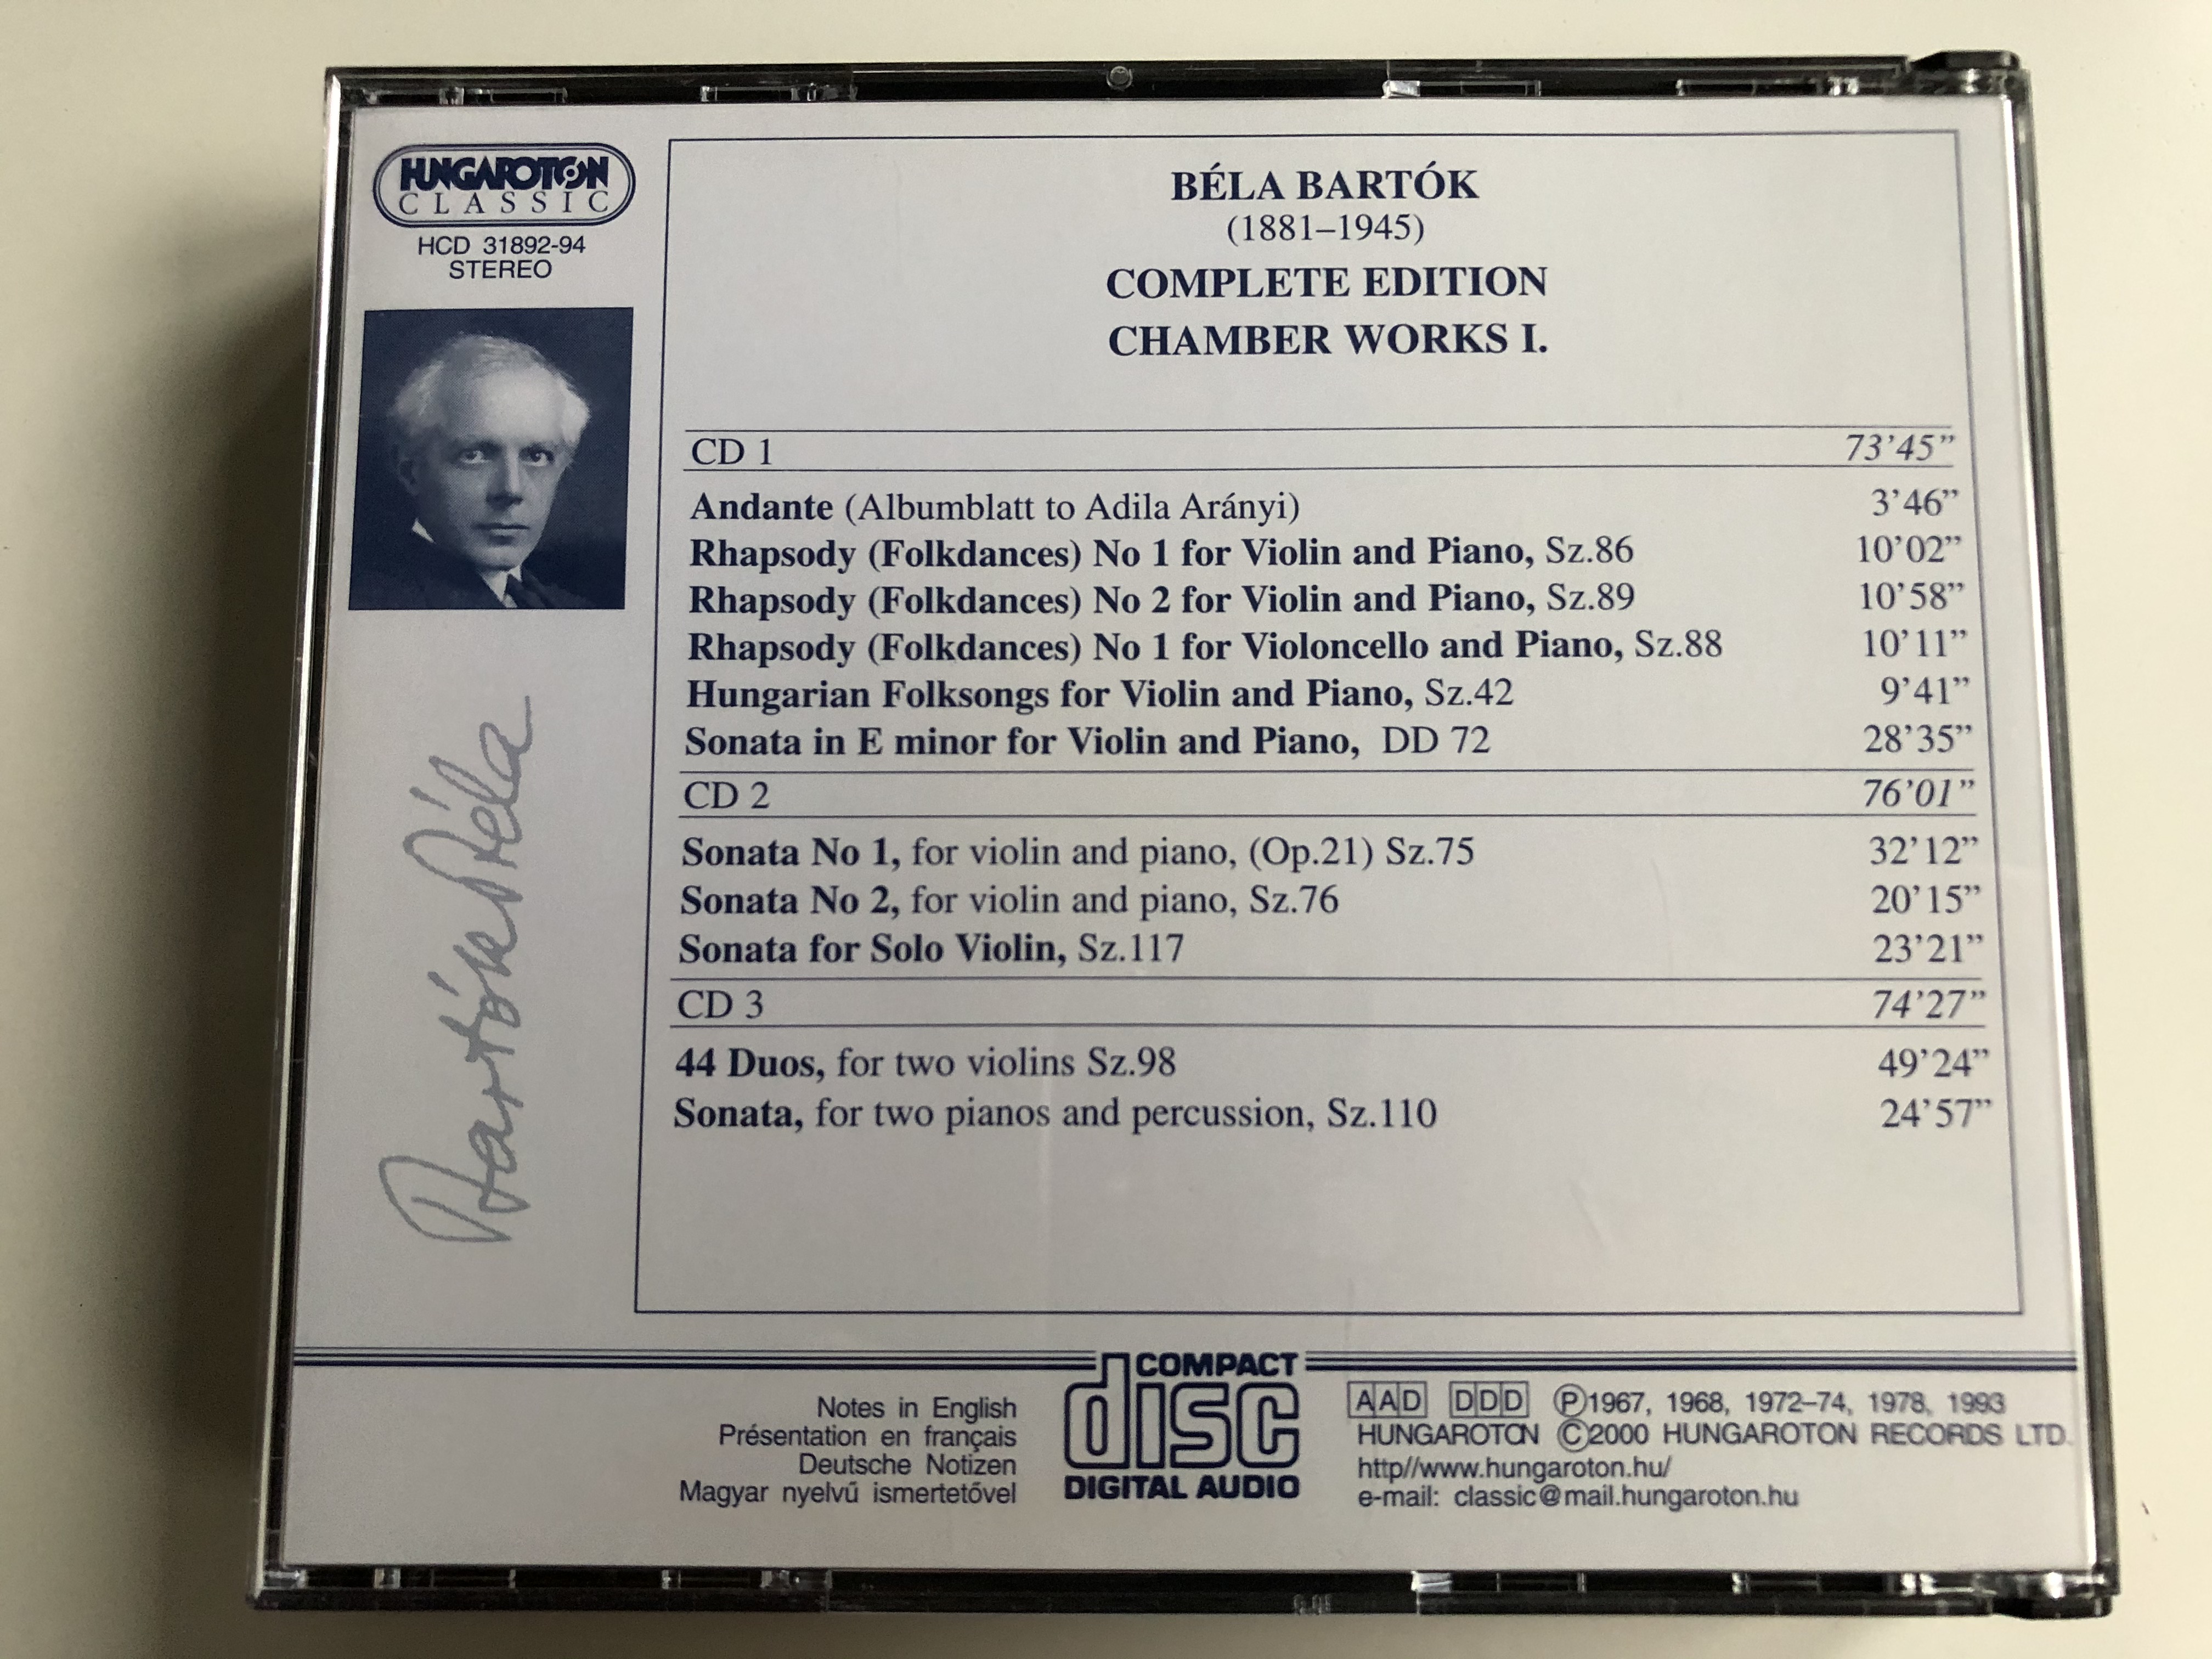 bartok-complete-edition-chamber-works-i.-andante-rhapsodies-folkdances-nos-1-2-for-violoncello-and-piano-hungarian-folksongs-for-violin-and-piano-hungaroton-classic-3x-audio-cd-2000-stere-11-.jpg